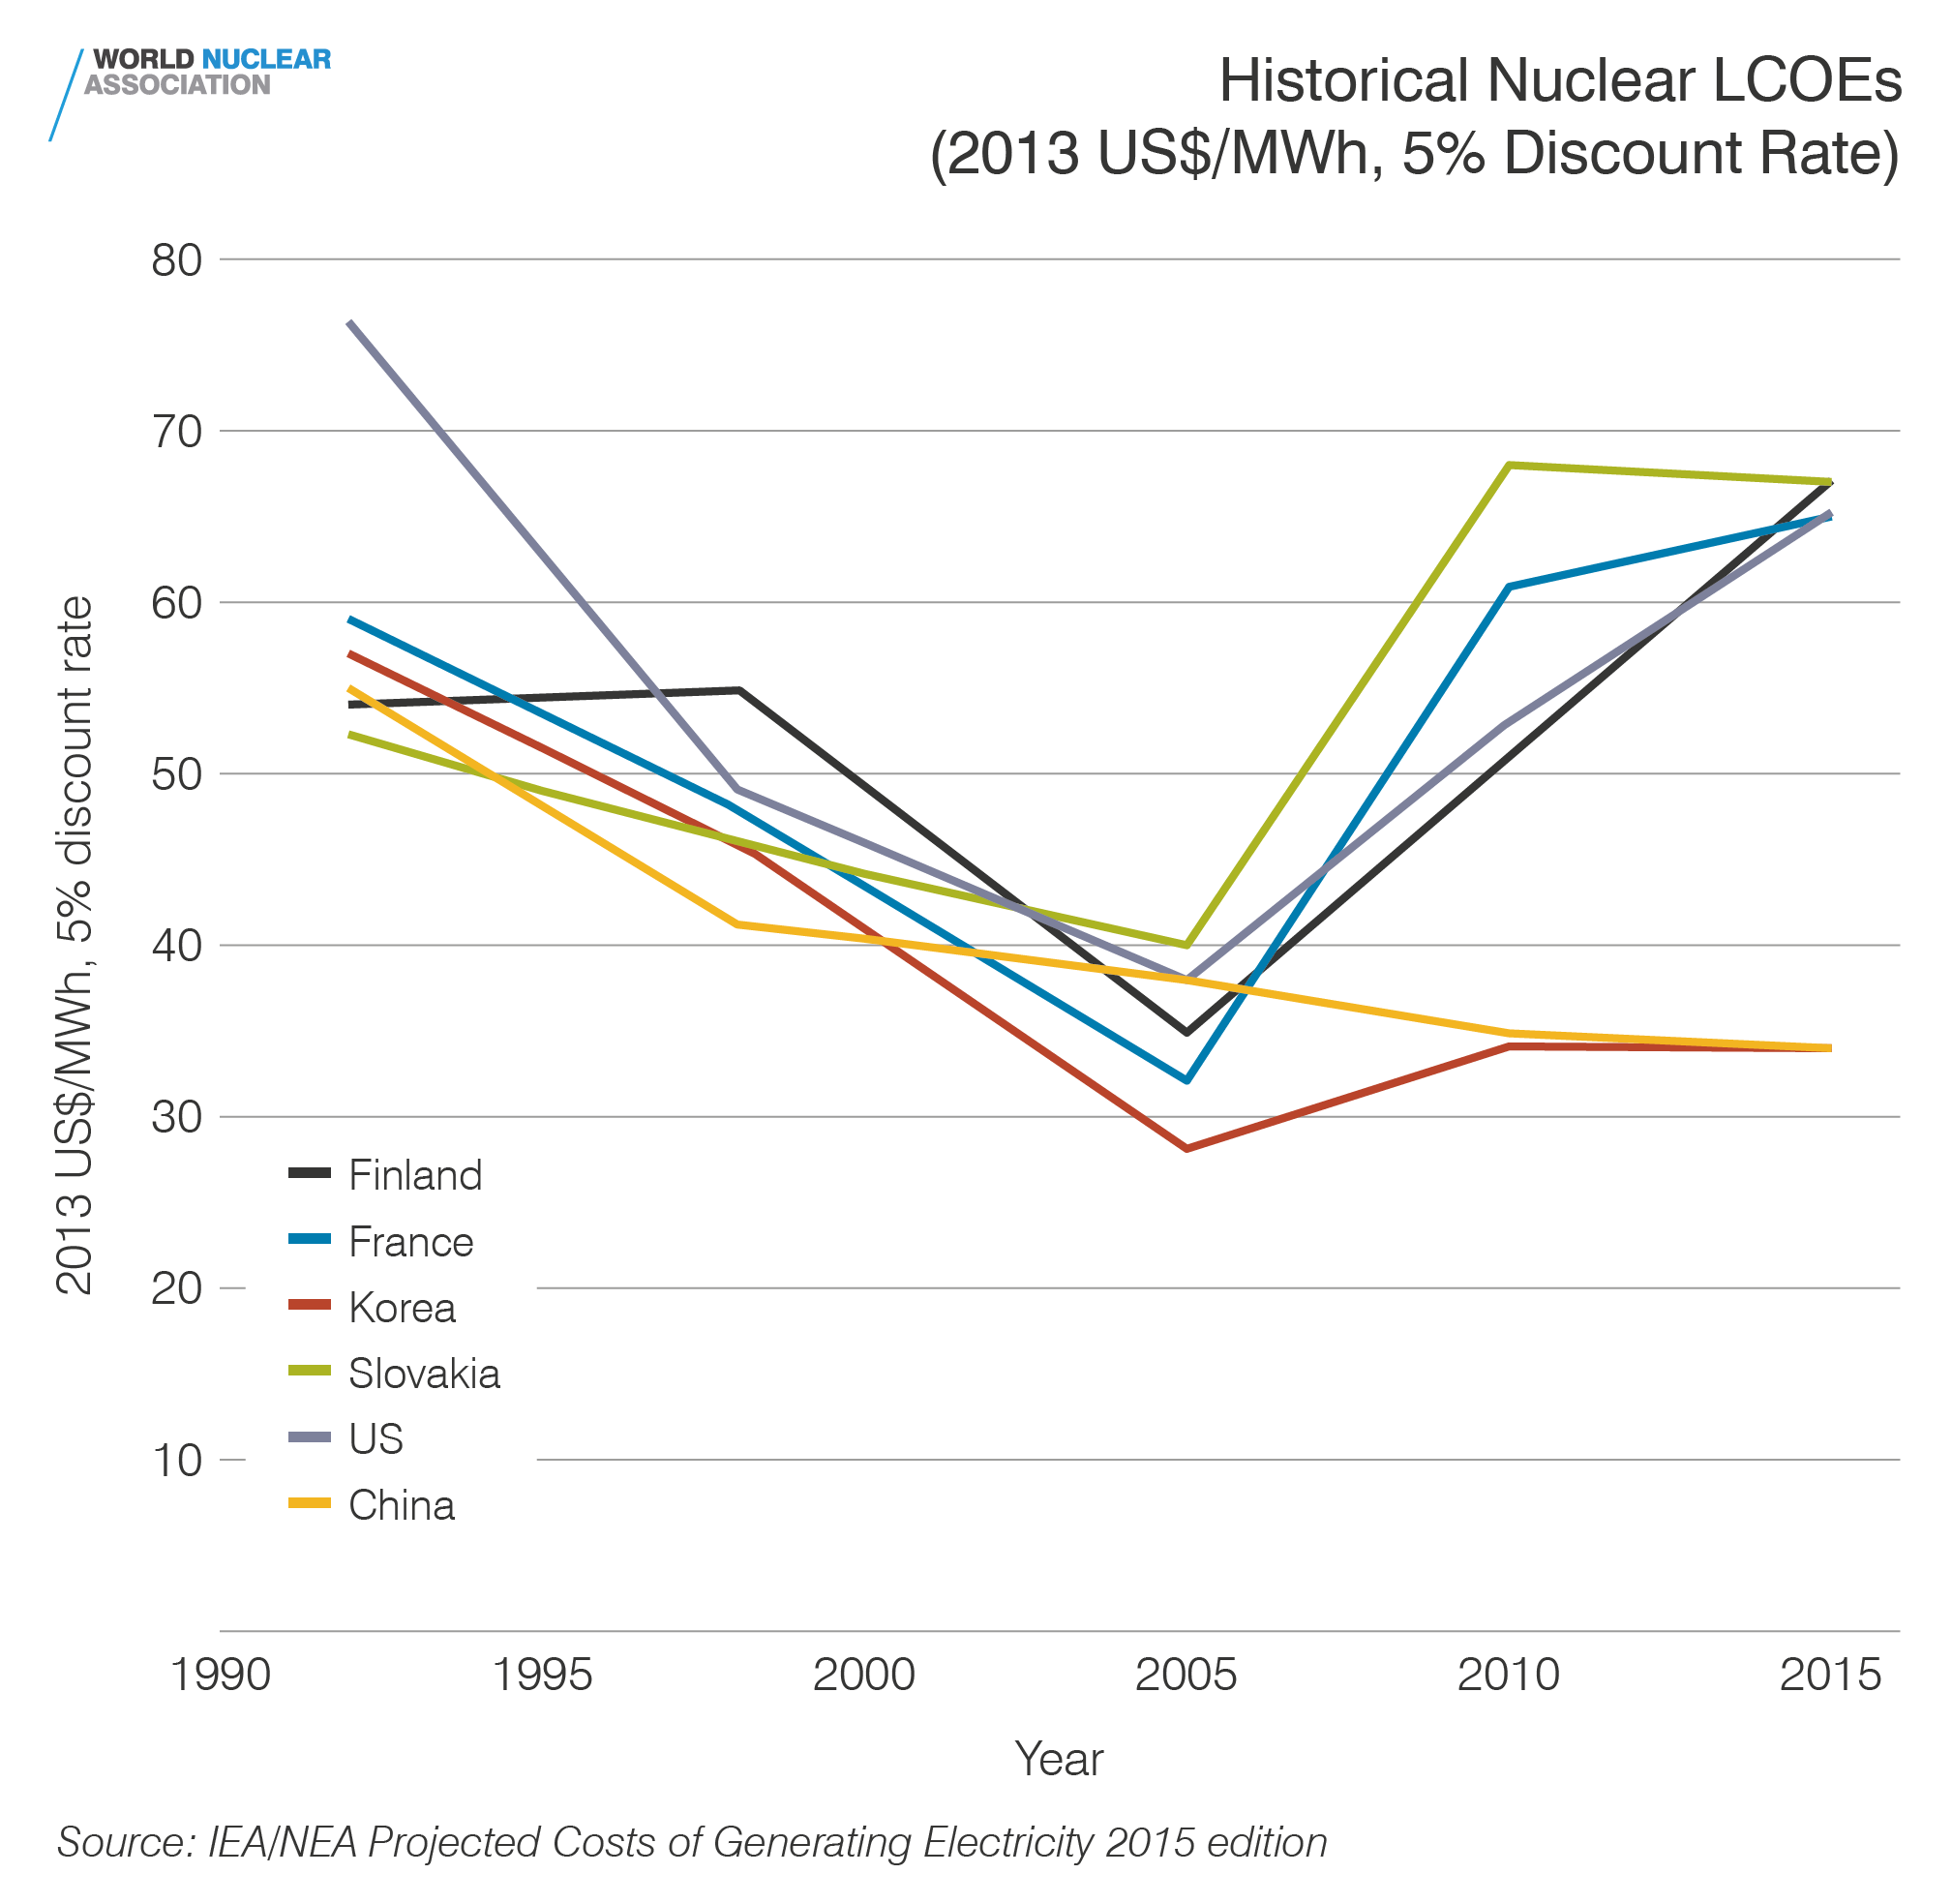 Historical Nuclear LCOEs (2013US$/MWh, 5% discount rate)